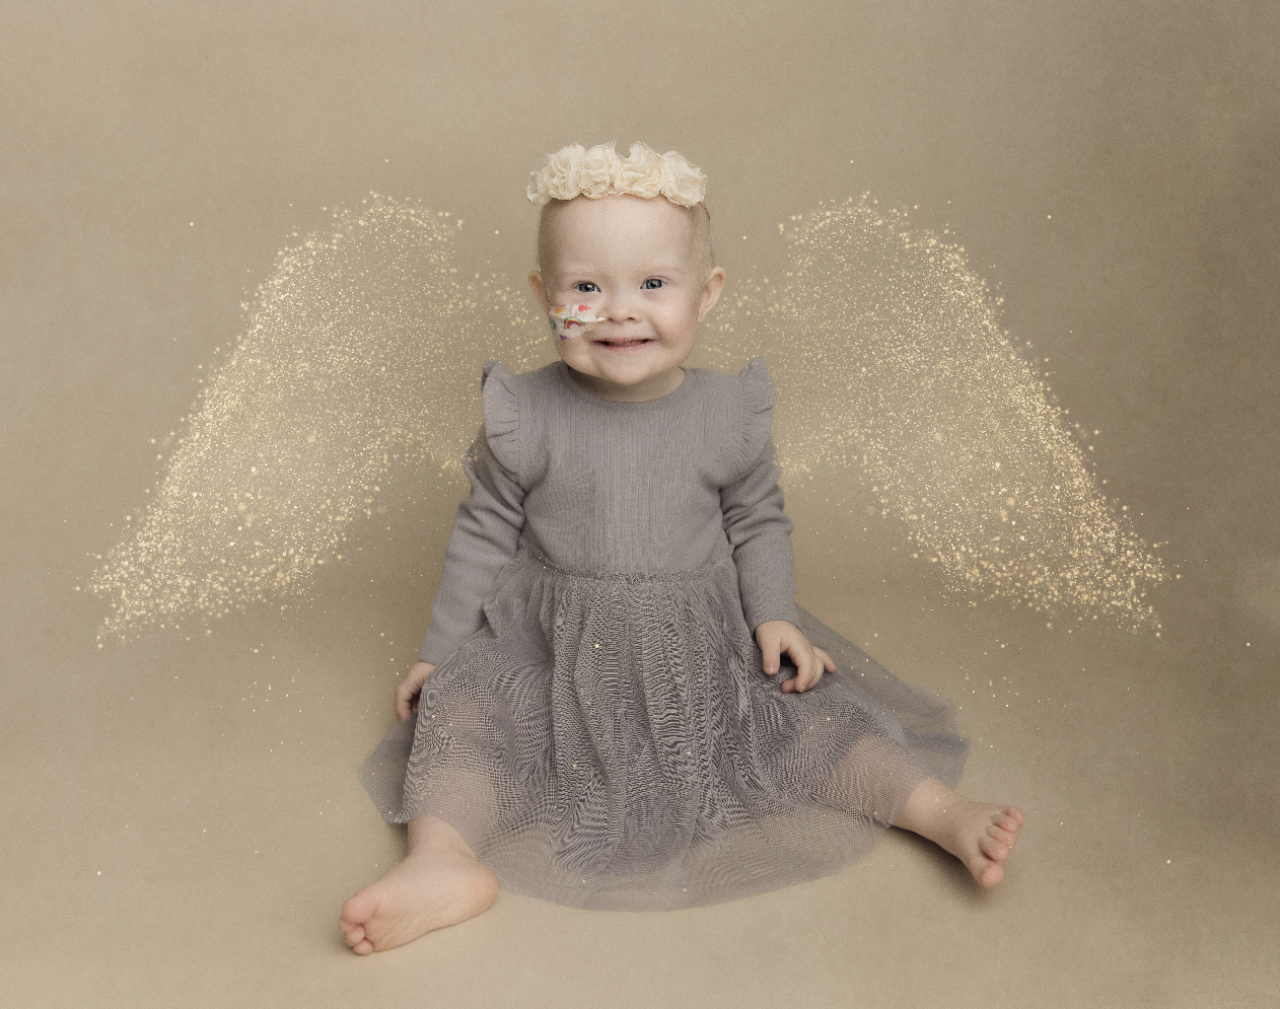 Ava sat smiling at the camera with angel wings behind her